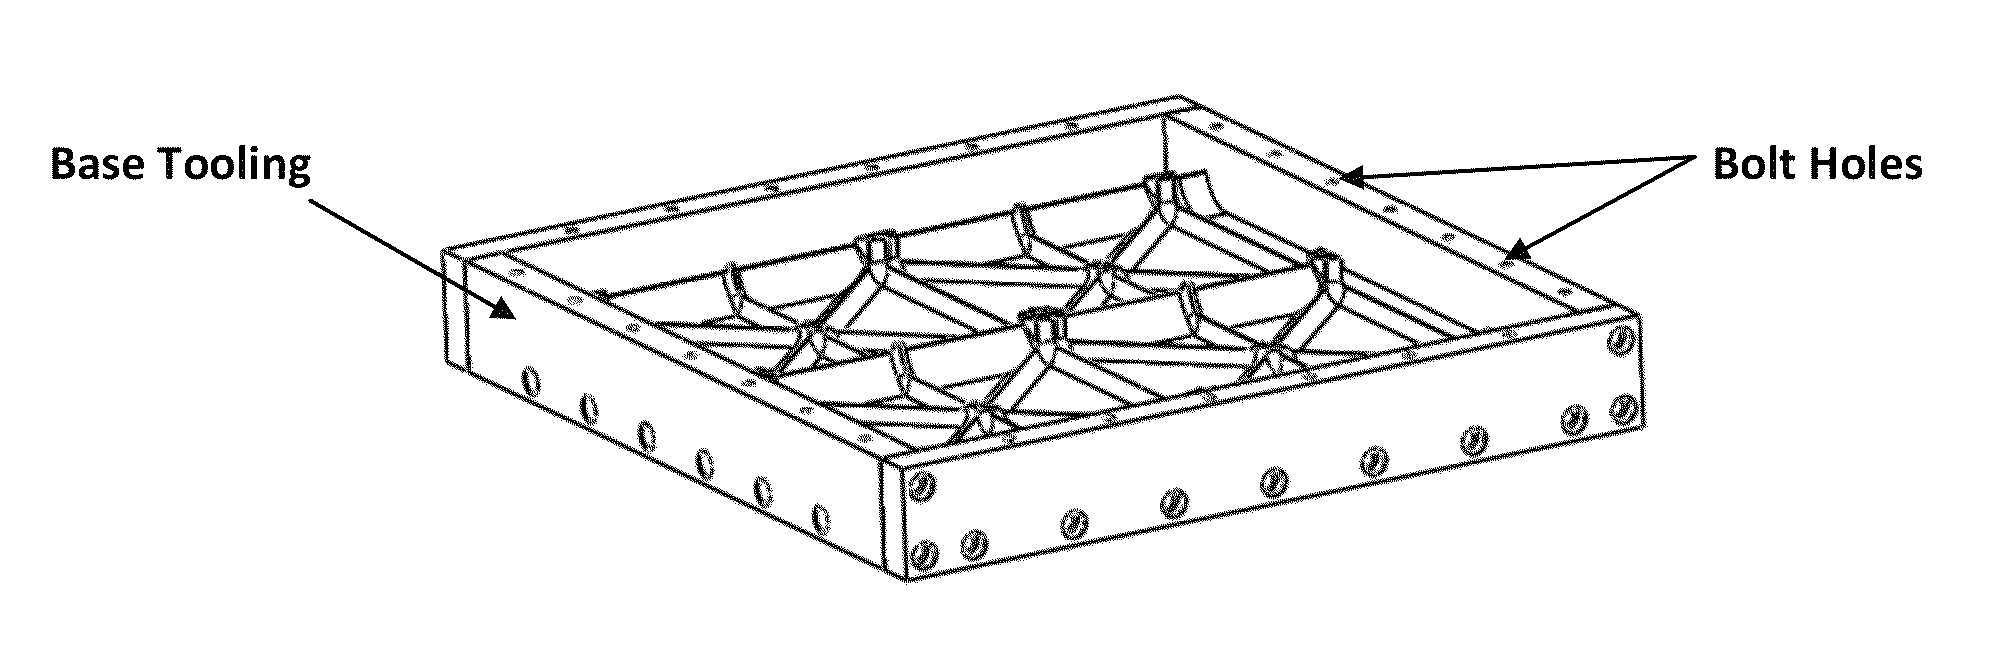 Method for fabricating composite grid-stiffened structures with integrated fluid channels